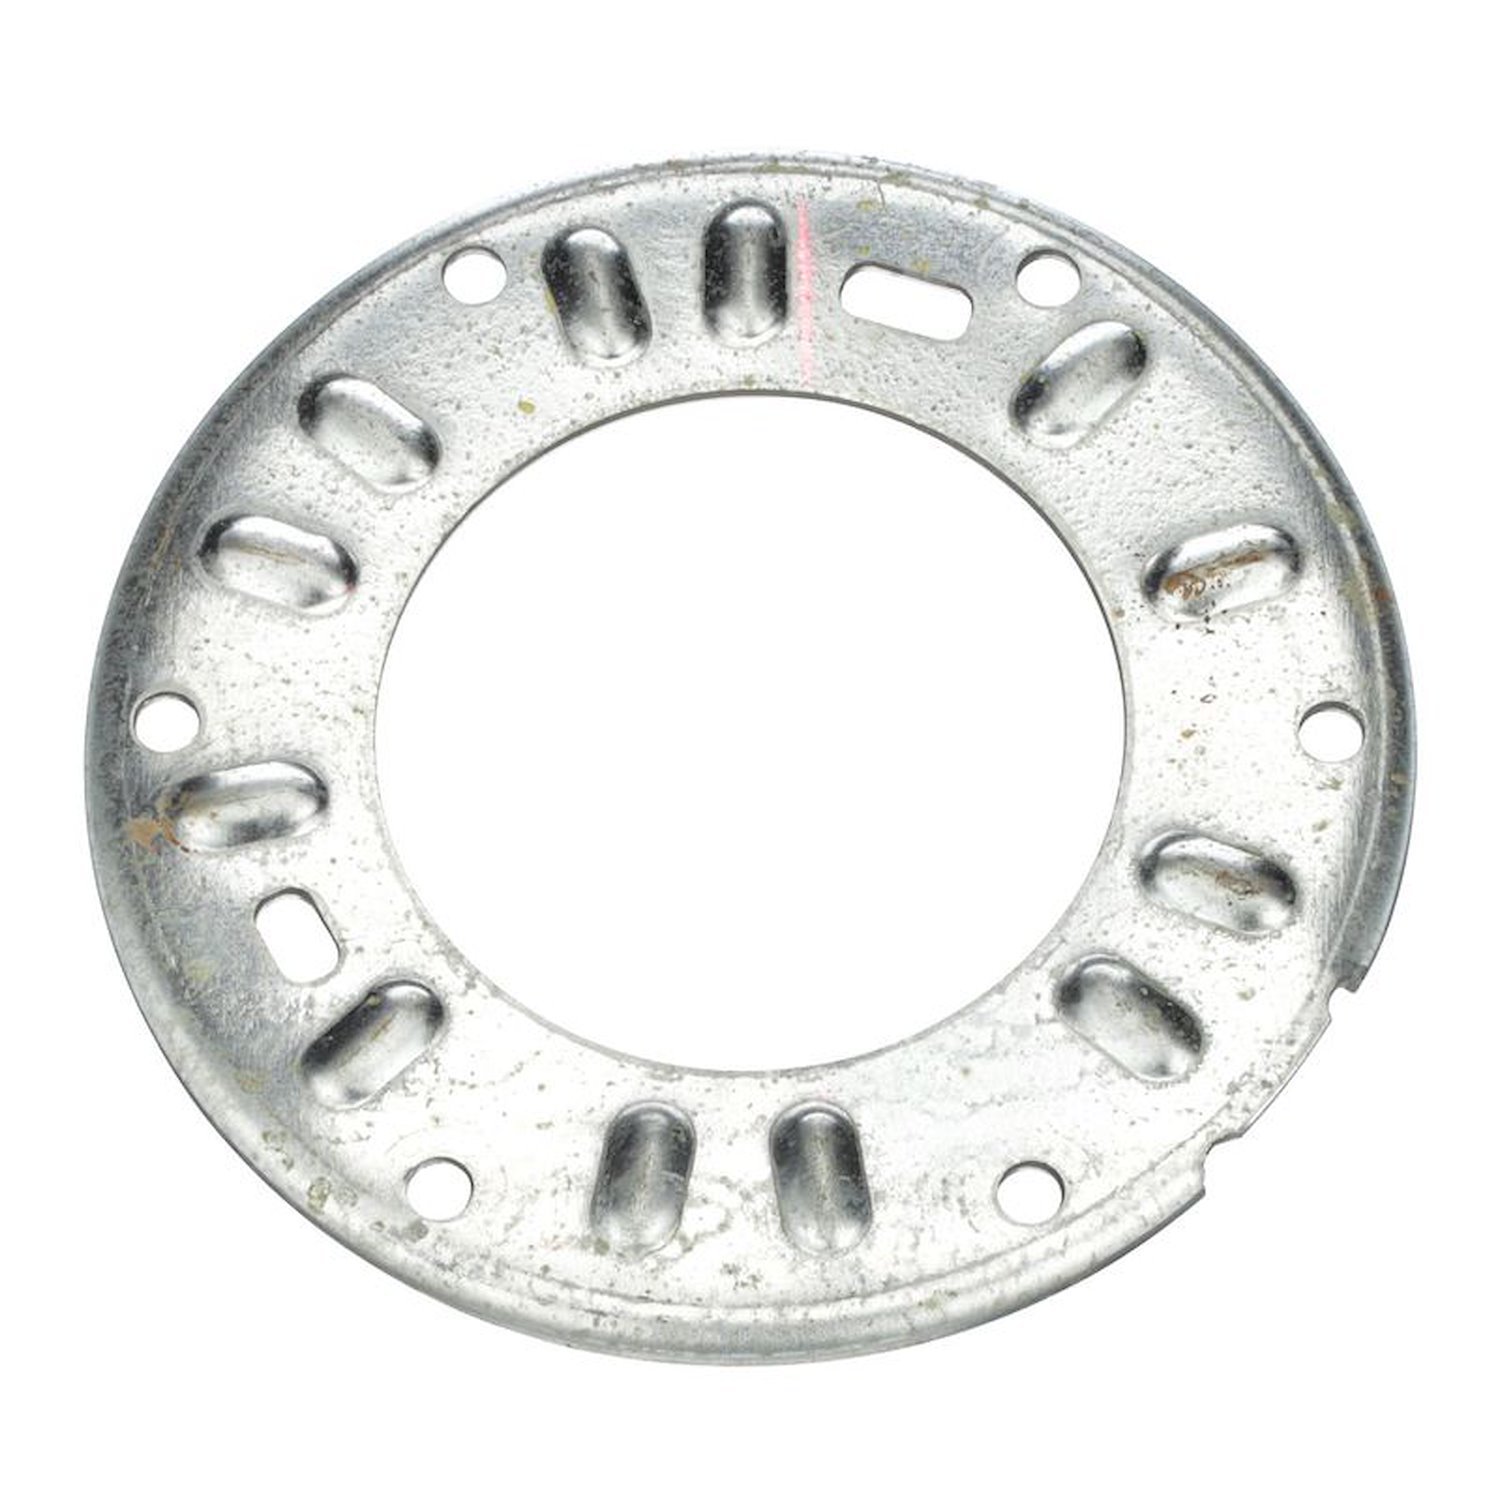 Fuel Tank Lock Ring for 1991-1996 GM Vehicles